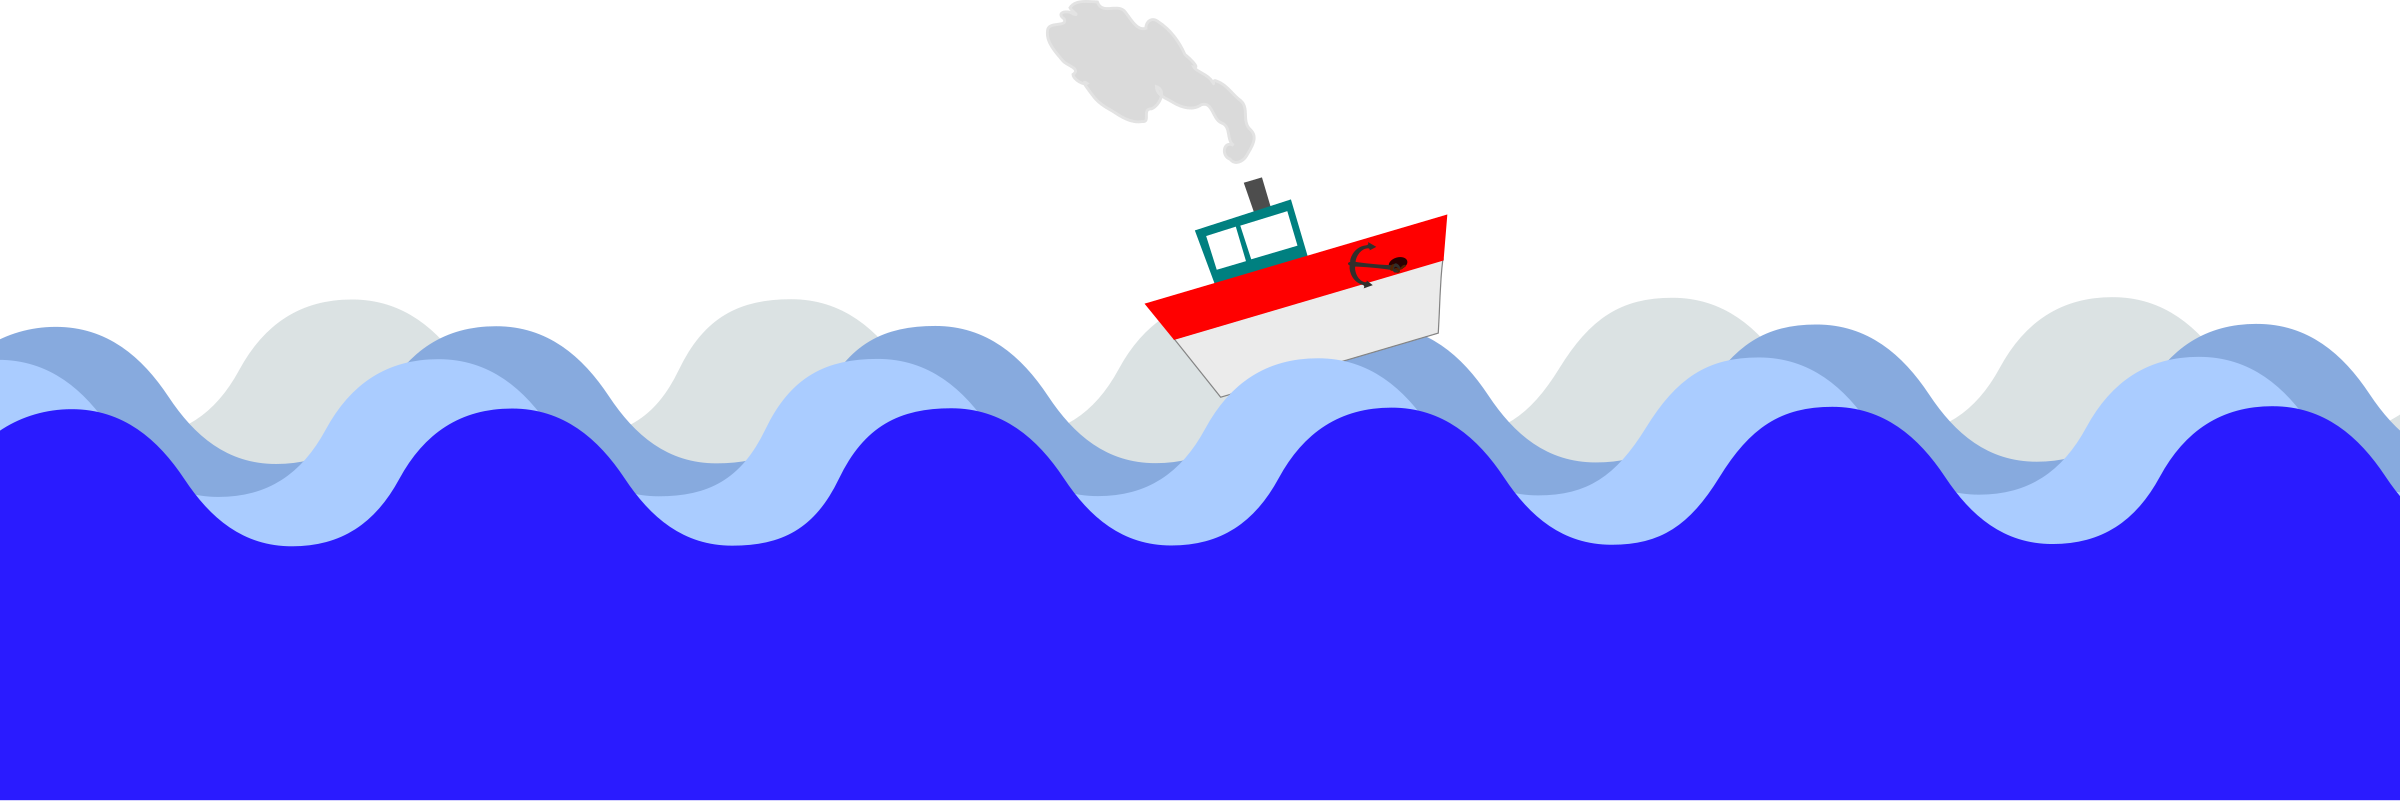 By sea clipart - Clipground